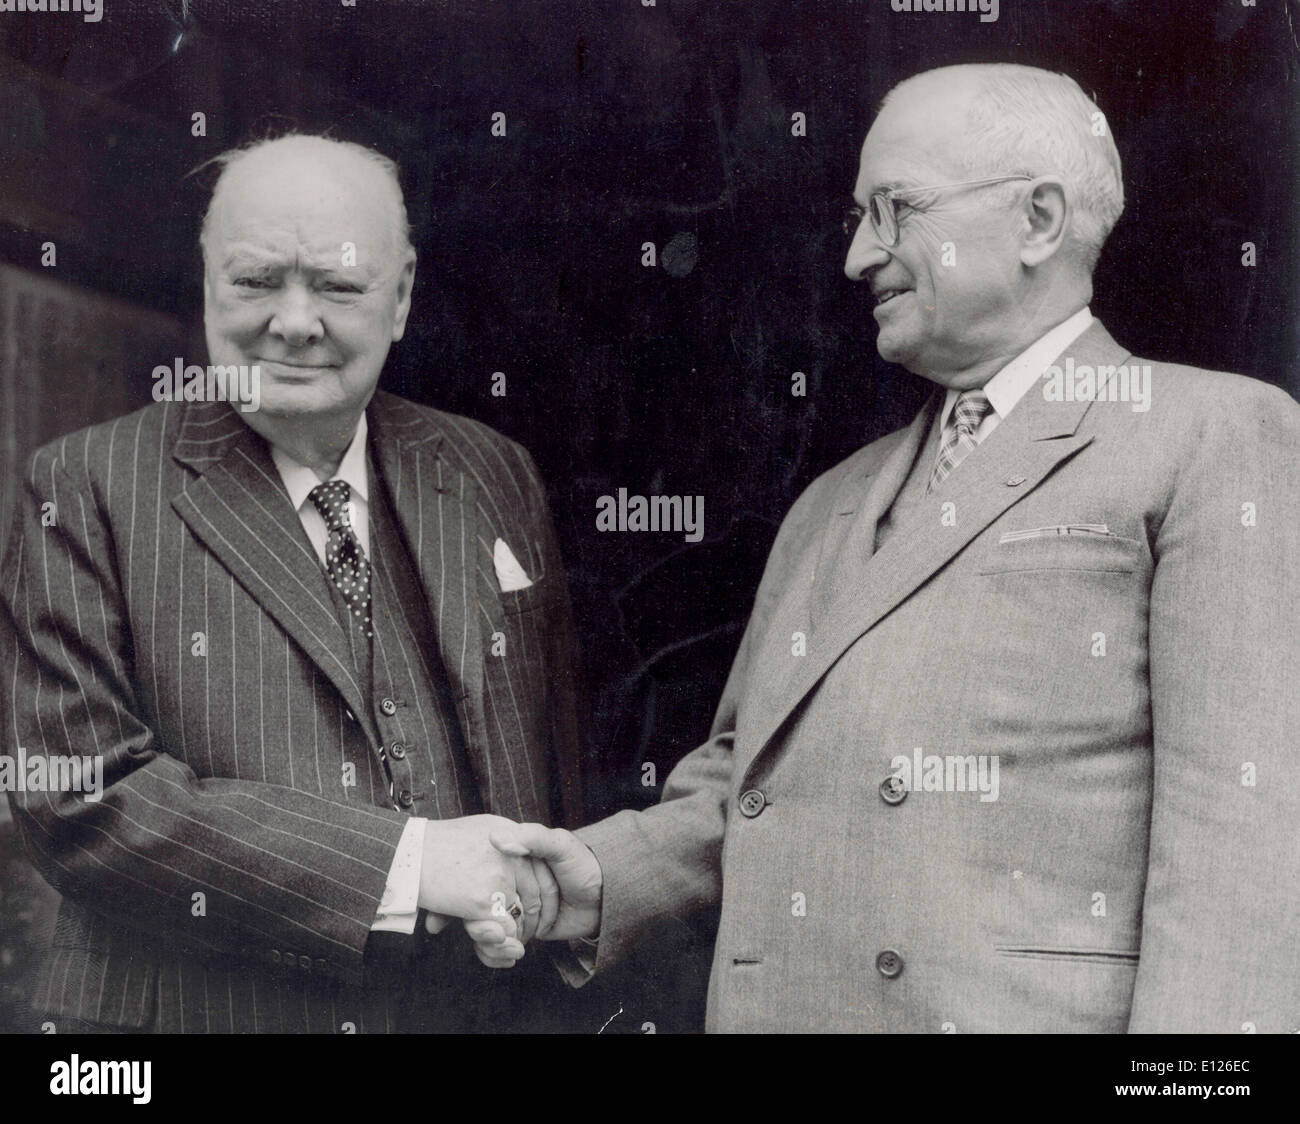 Nov 19, 2007 - London, England, UK - Former British PM WINSTON CHURCHILL welcomes US President HARRY S. TRUMAN to his home at Chartwell (Credit Image: KEYSTONE Pictures USA/ZUMAPRESS.com) Stock Photo